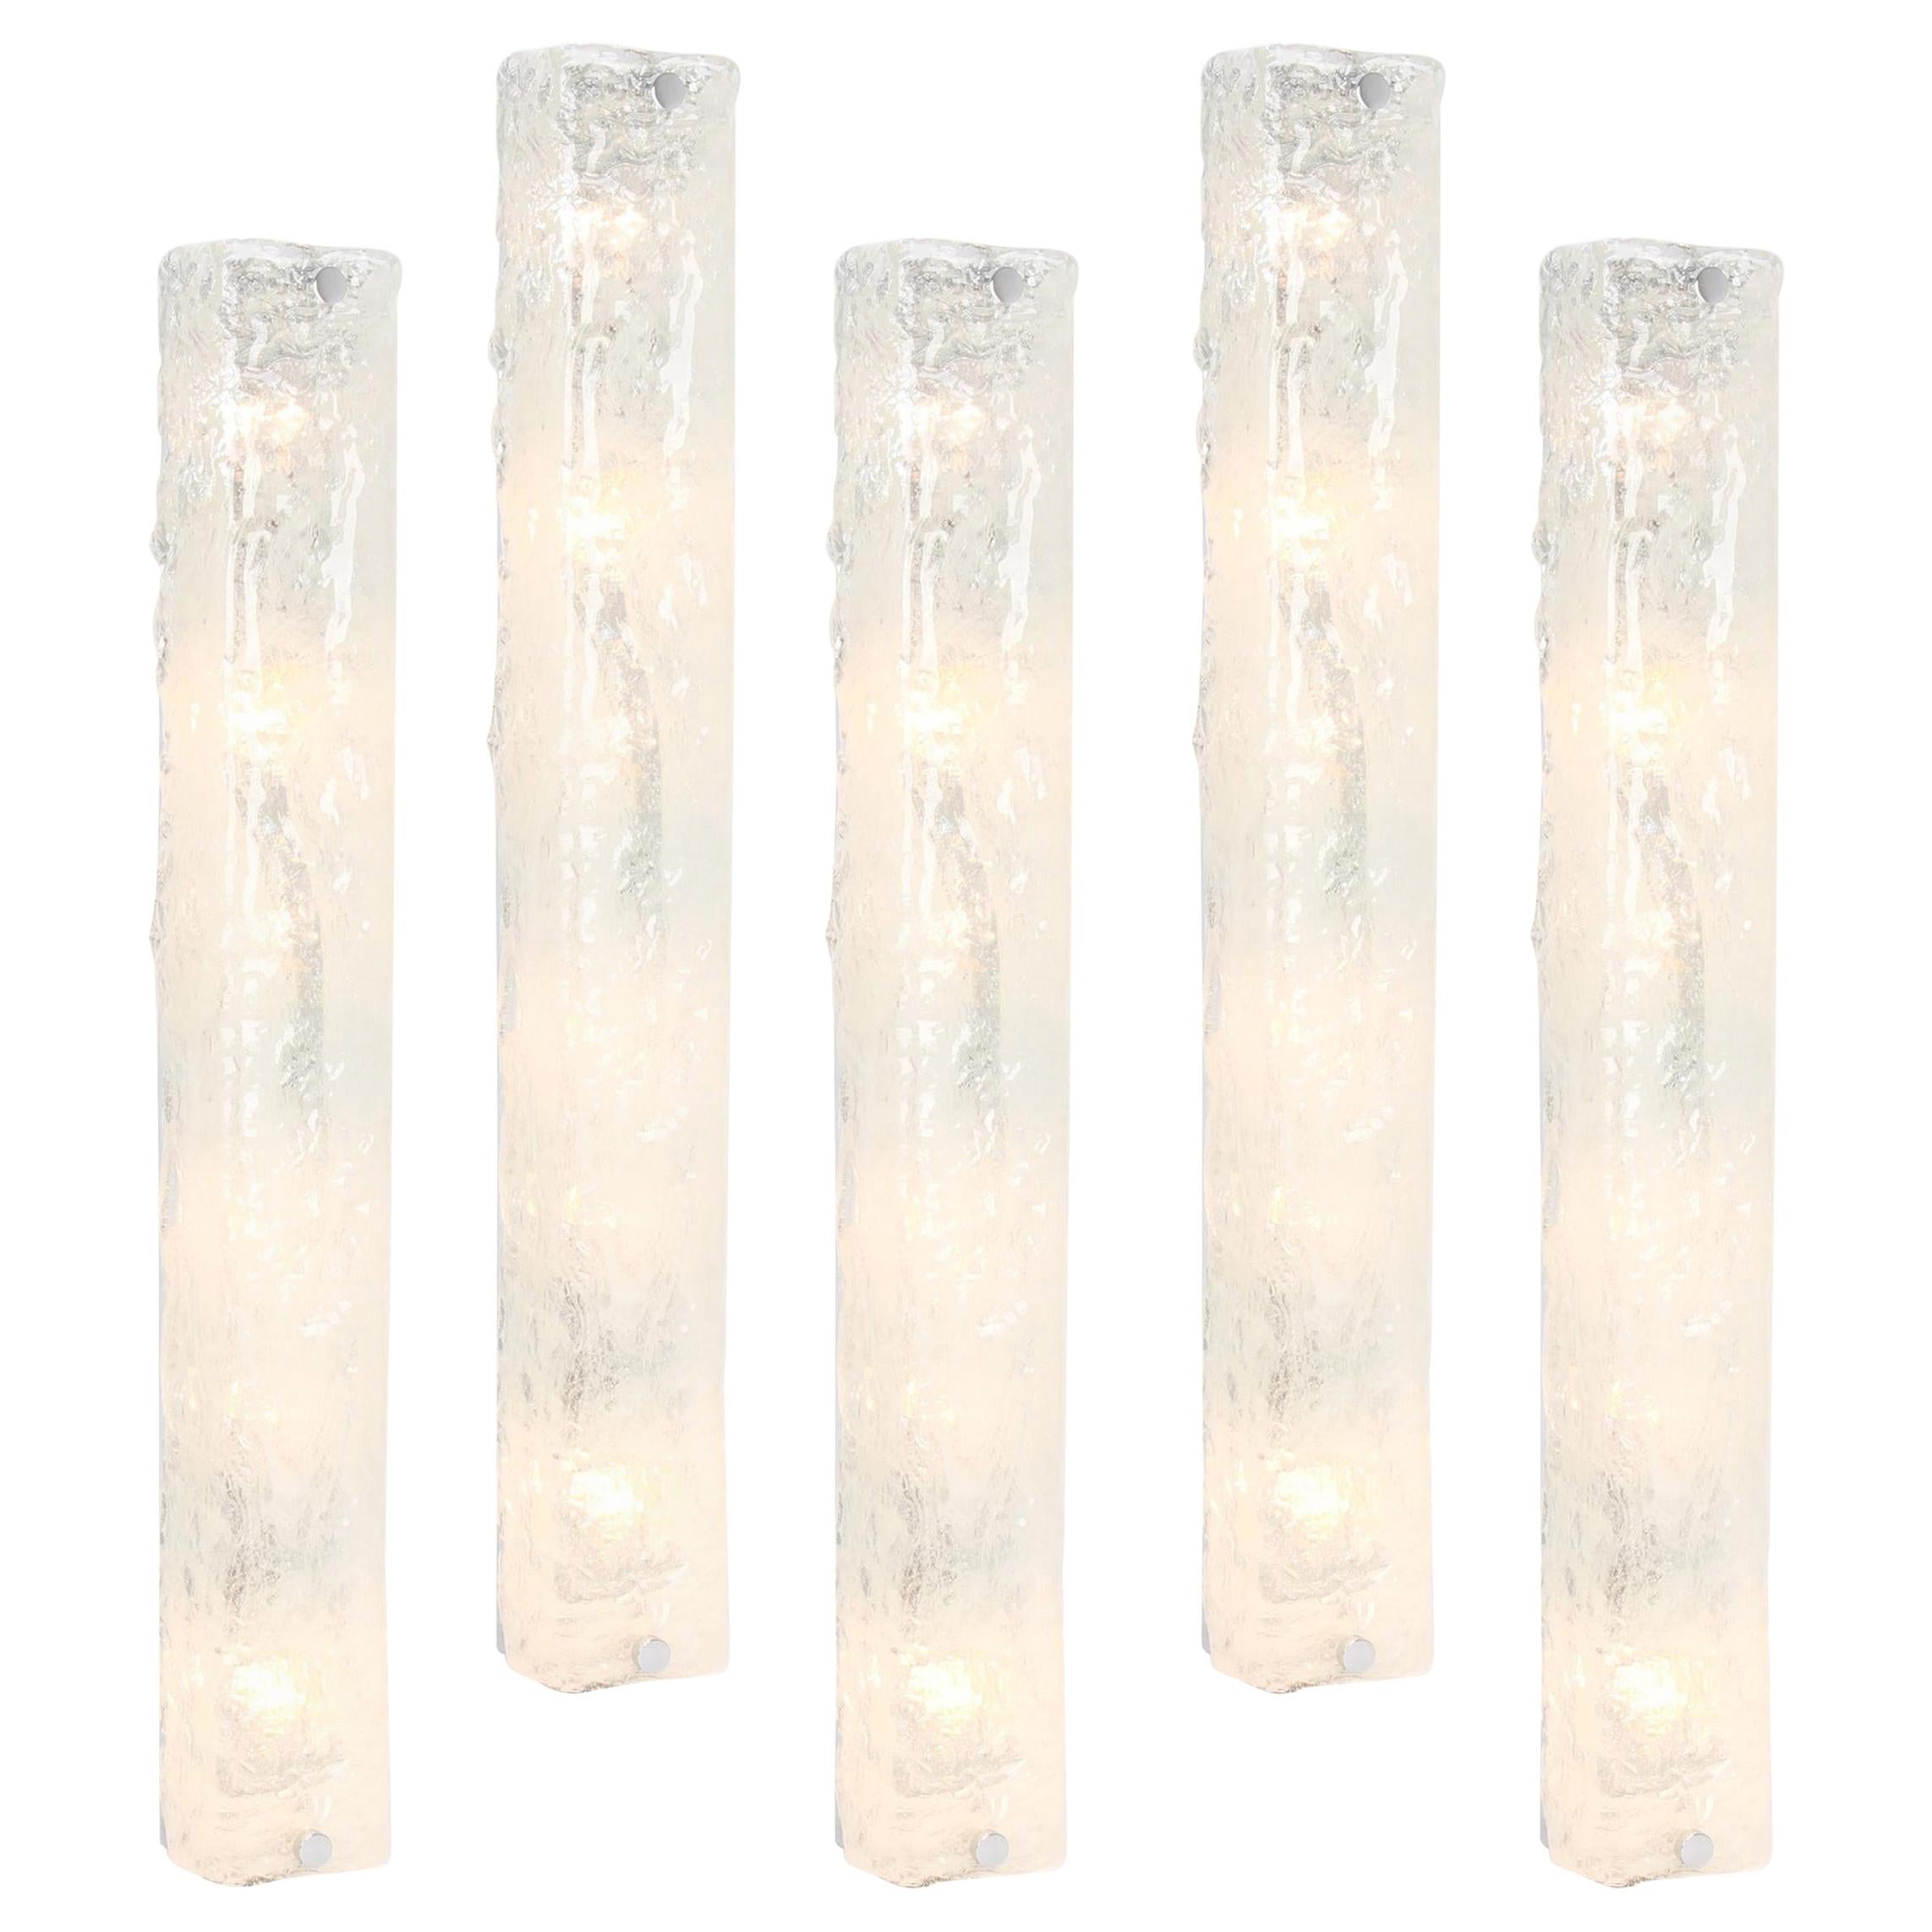 1 of 2 Extra Large Murano Glass Sconces Wall Fixtures by Hillebrand, Germany